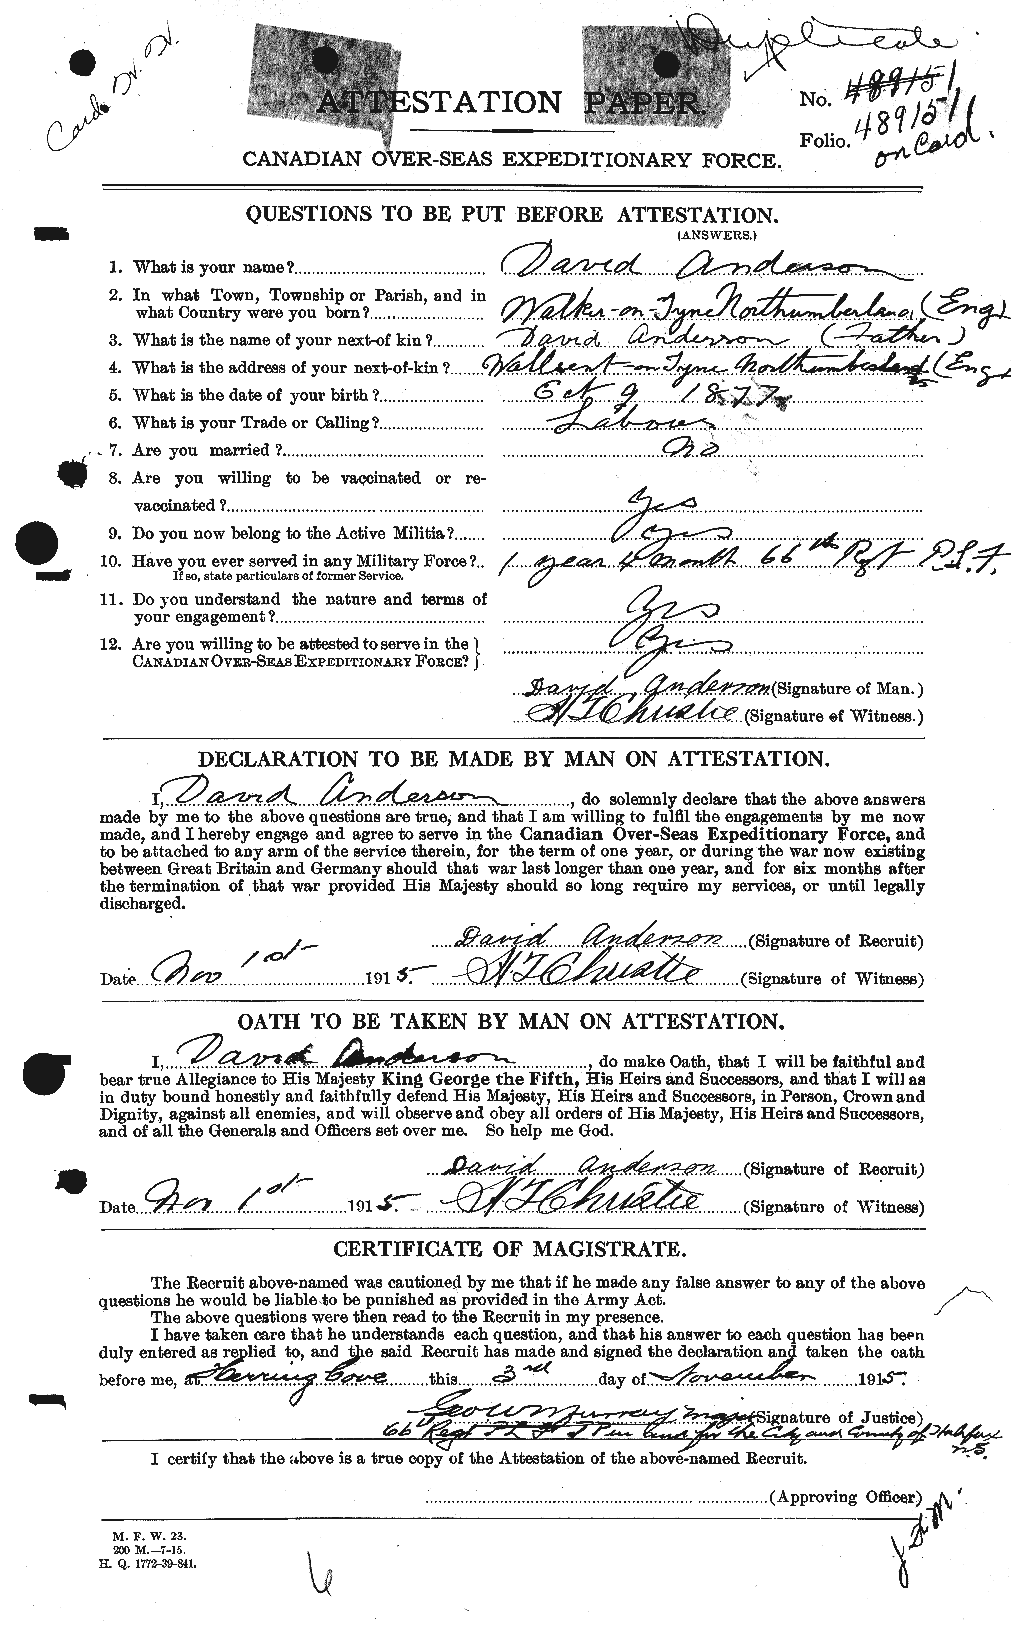 Personnel Records of the First World War - CEF 210025a